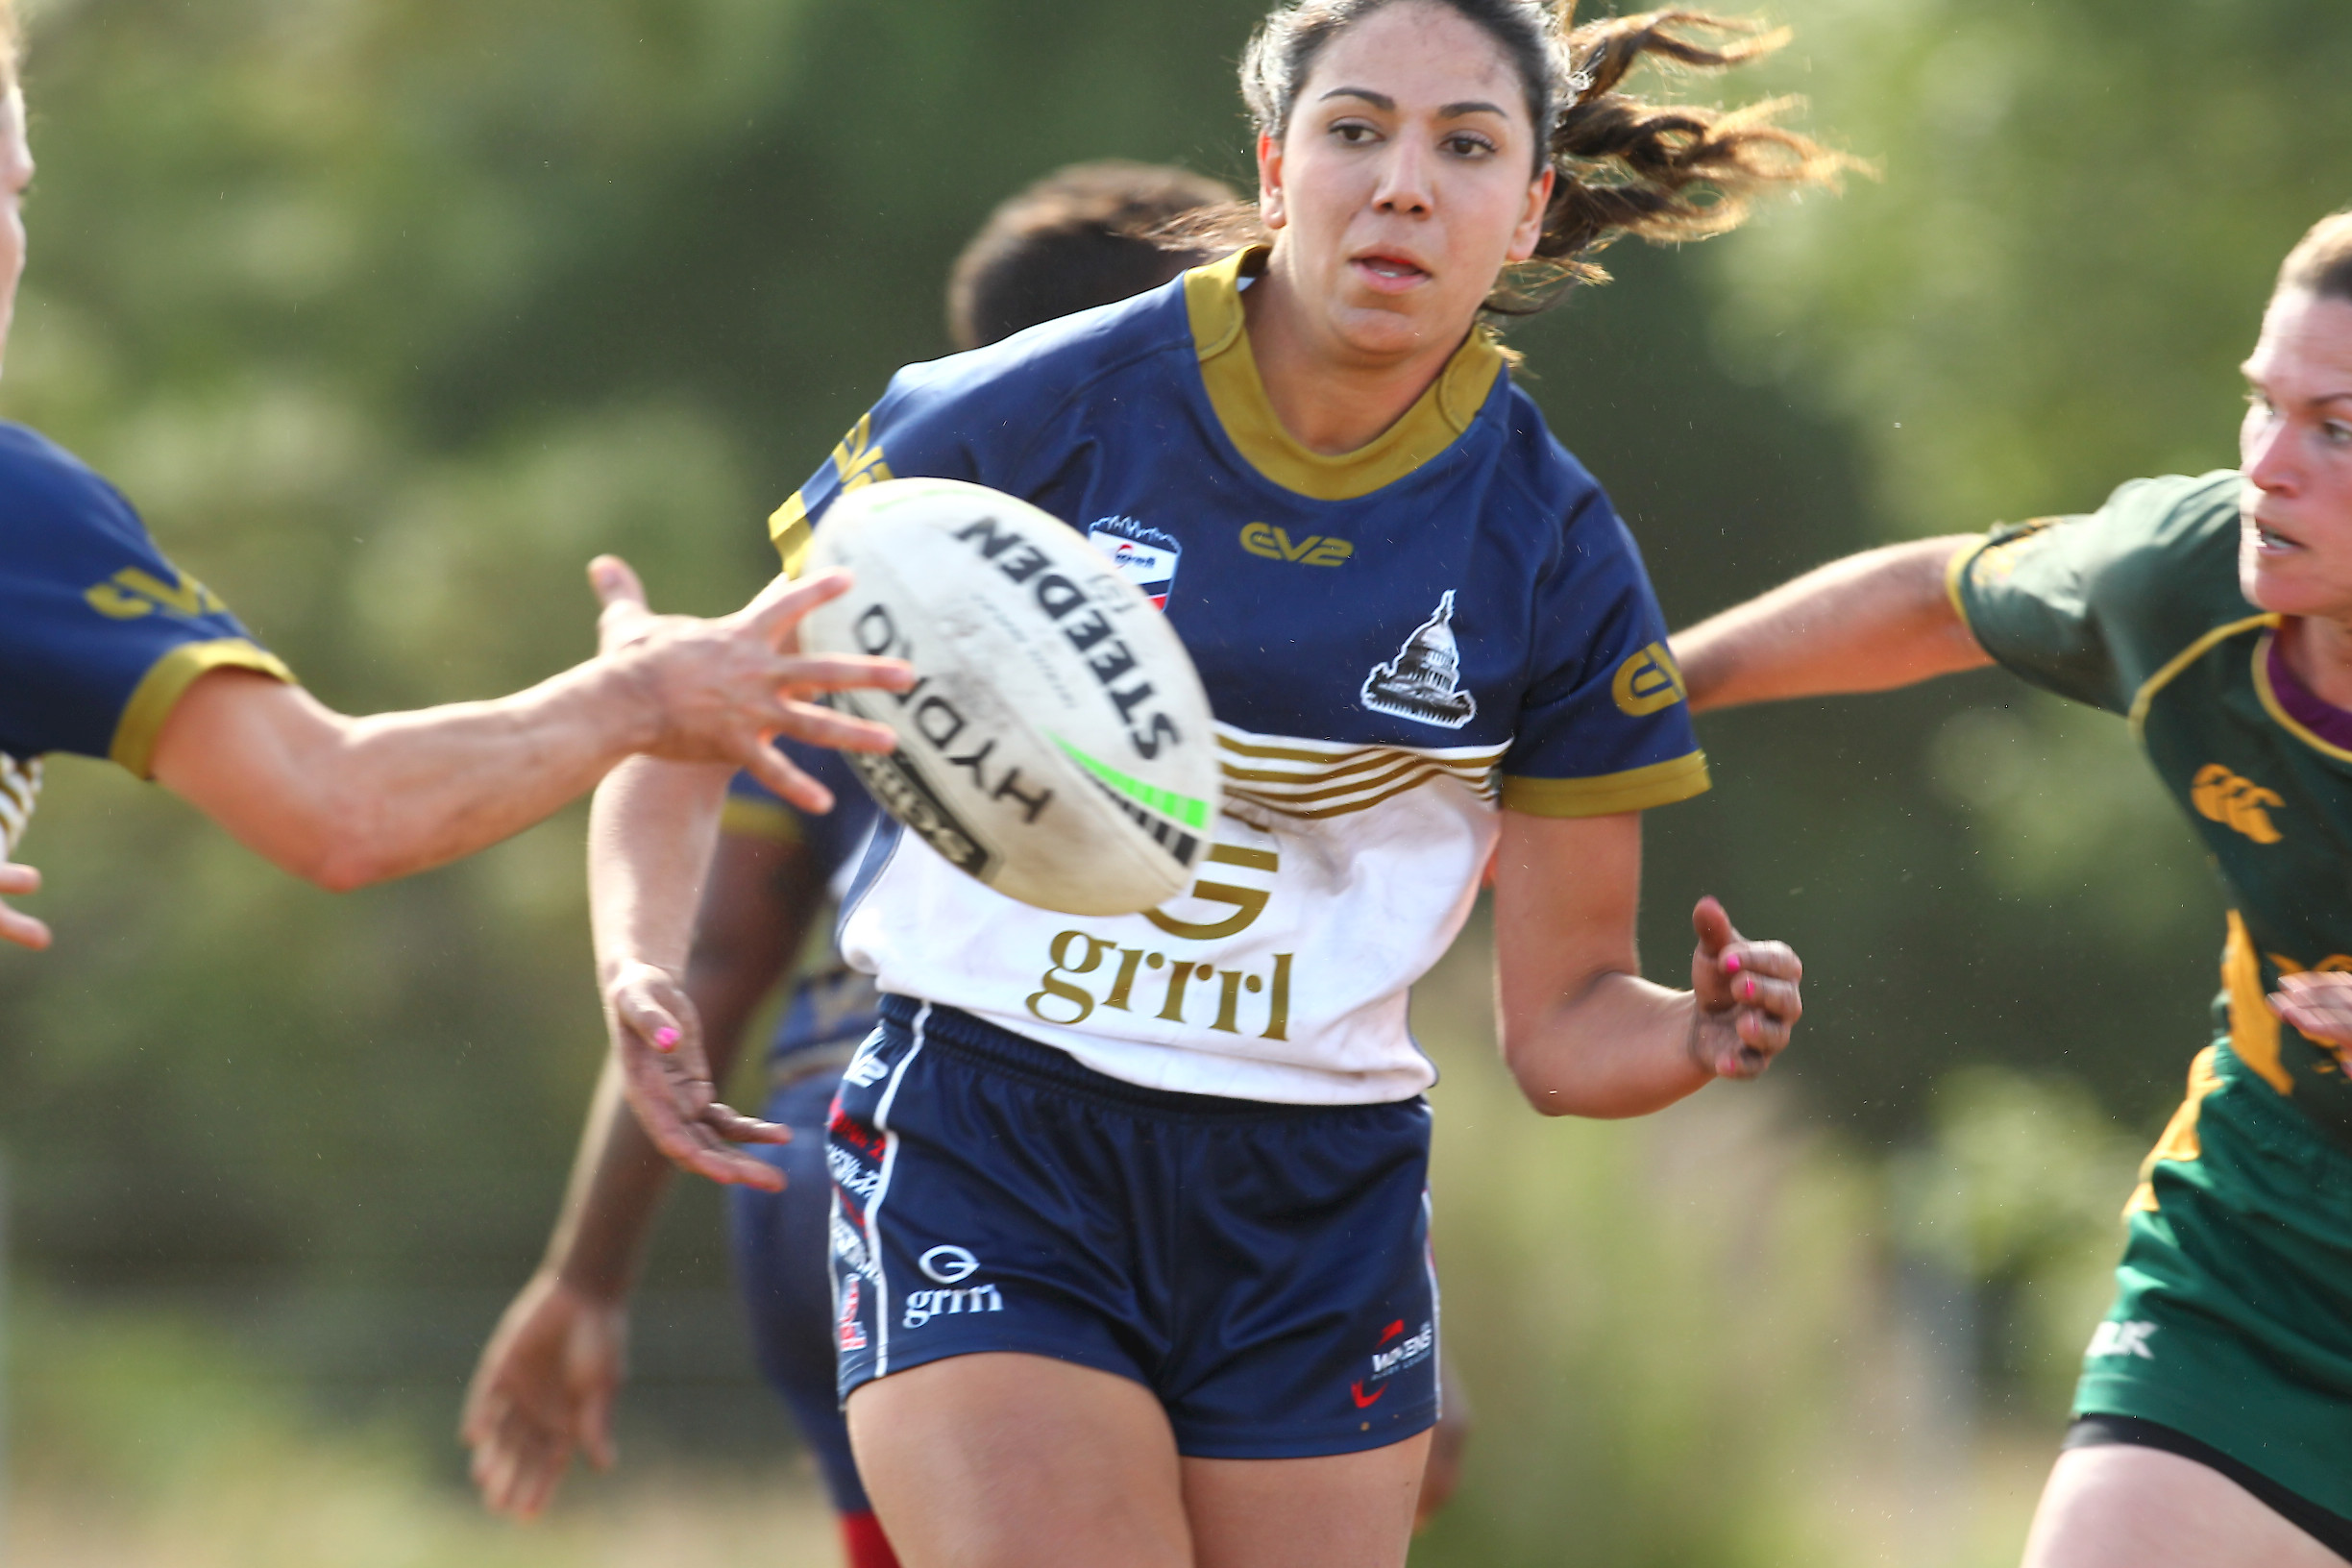 Double Header in Jacksonville to feature both Women's and Men's Rugby League